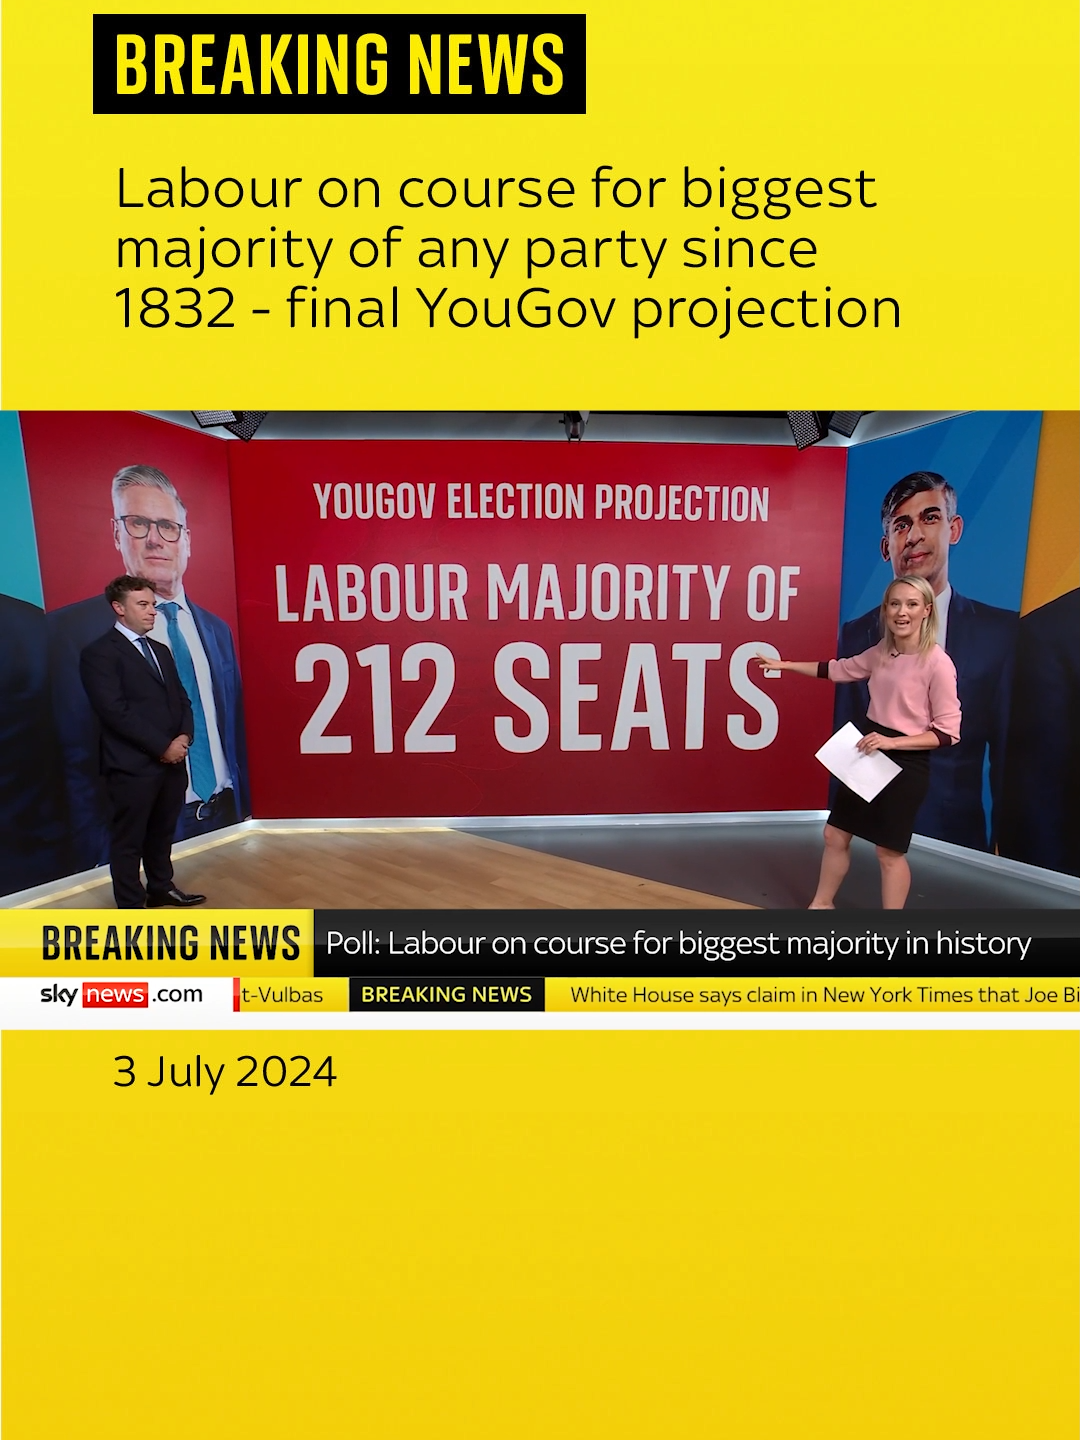 #Labour are on course for a landslide victory on Thursday with a majority of 212 seats according to the final YouGov #poll projection of the #GeneralElection2024 campaign #fyp